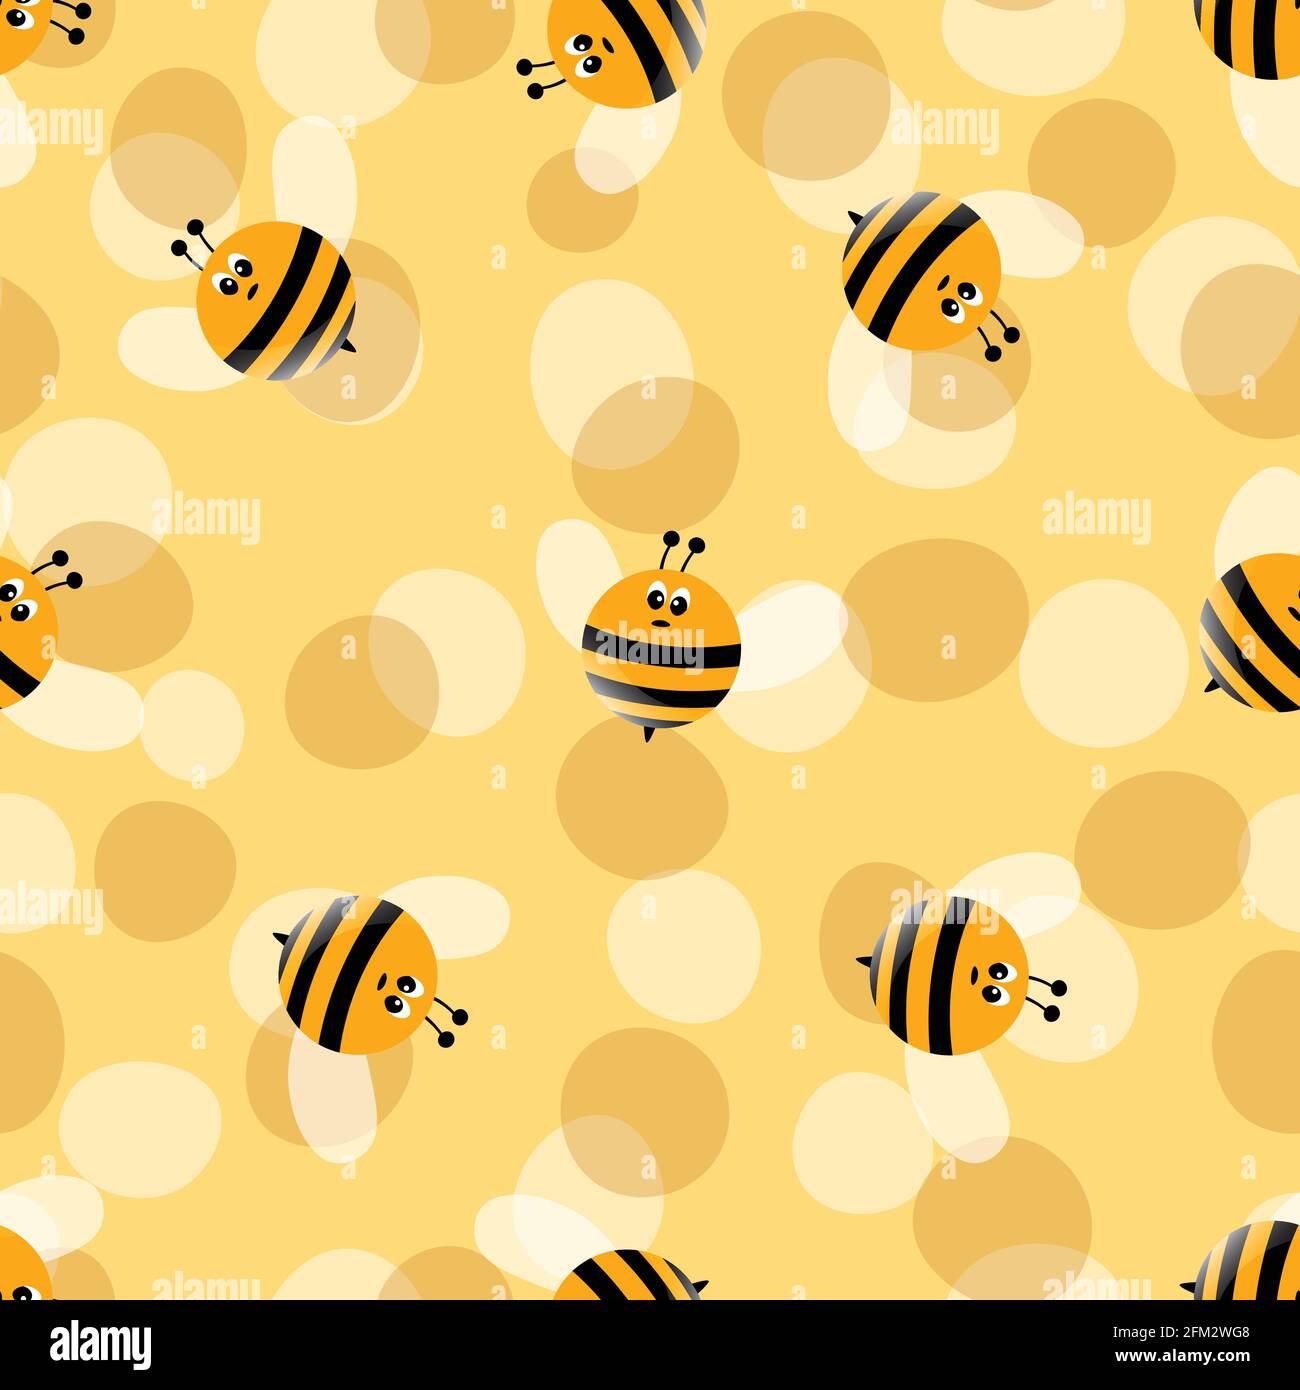 4300 Bee Costume Stock Photos Pictures  RoyaltyFree Images  iStock   Man in bee costume Kid bee costume Bee costume adult